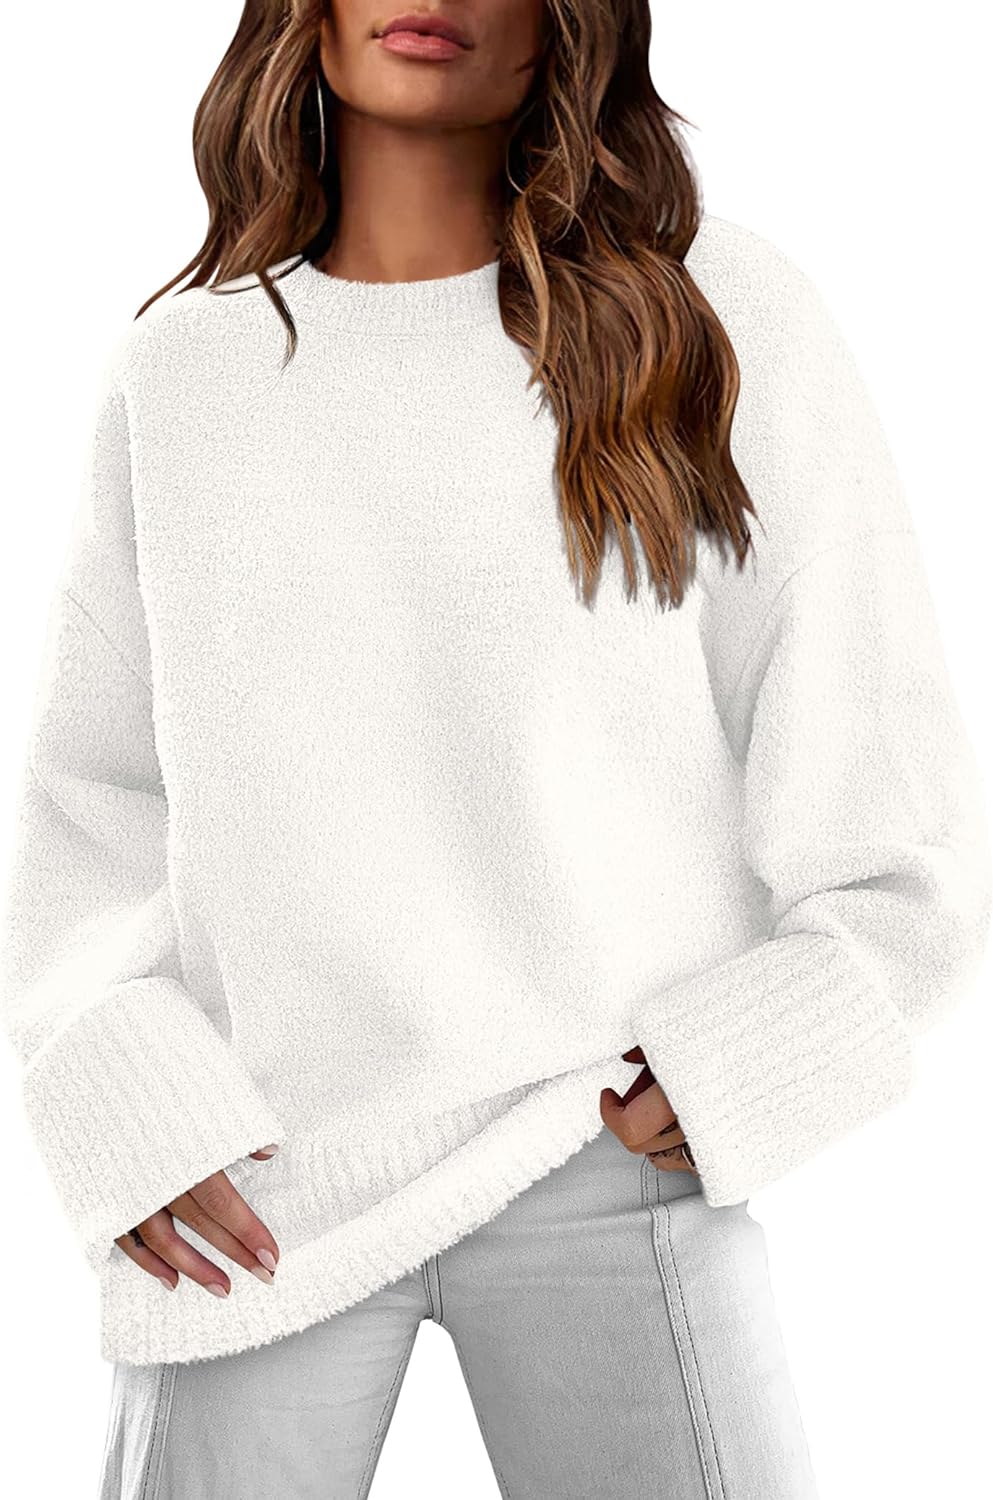 Stay Warm and Stylish with XIEERDUO Plus Size Sweaters for Women